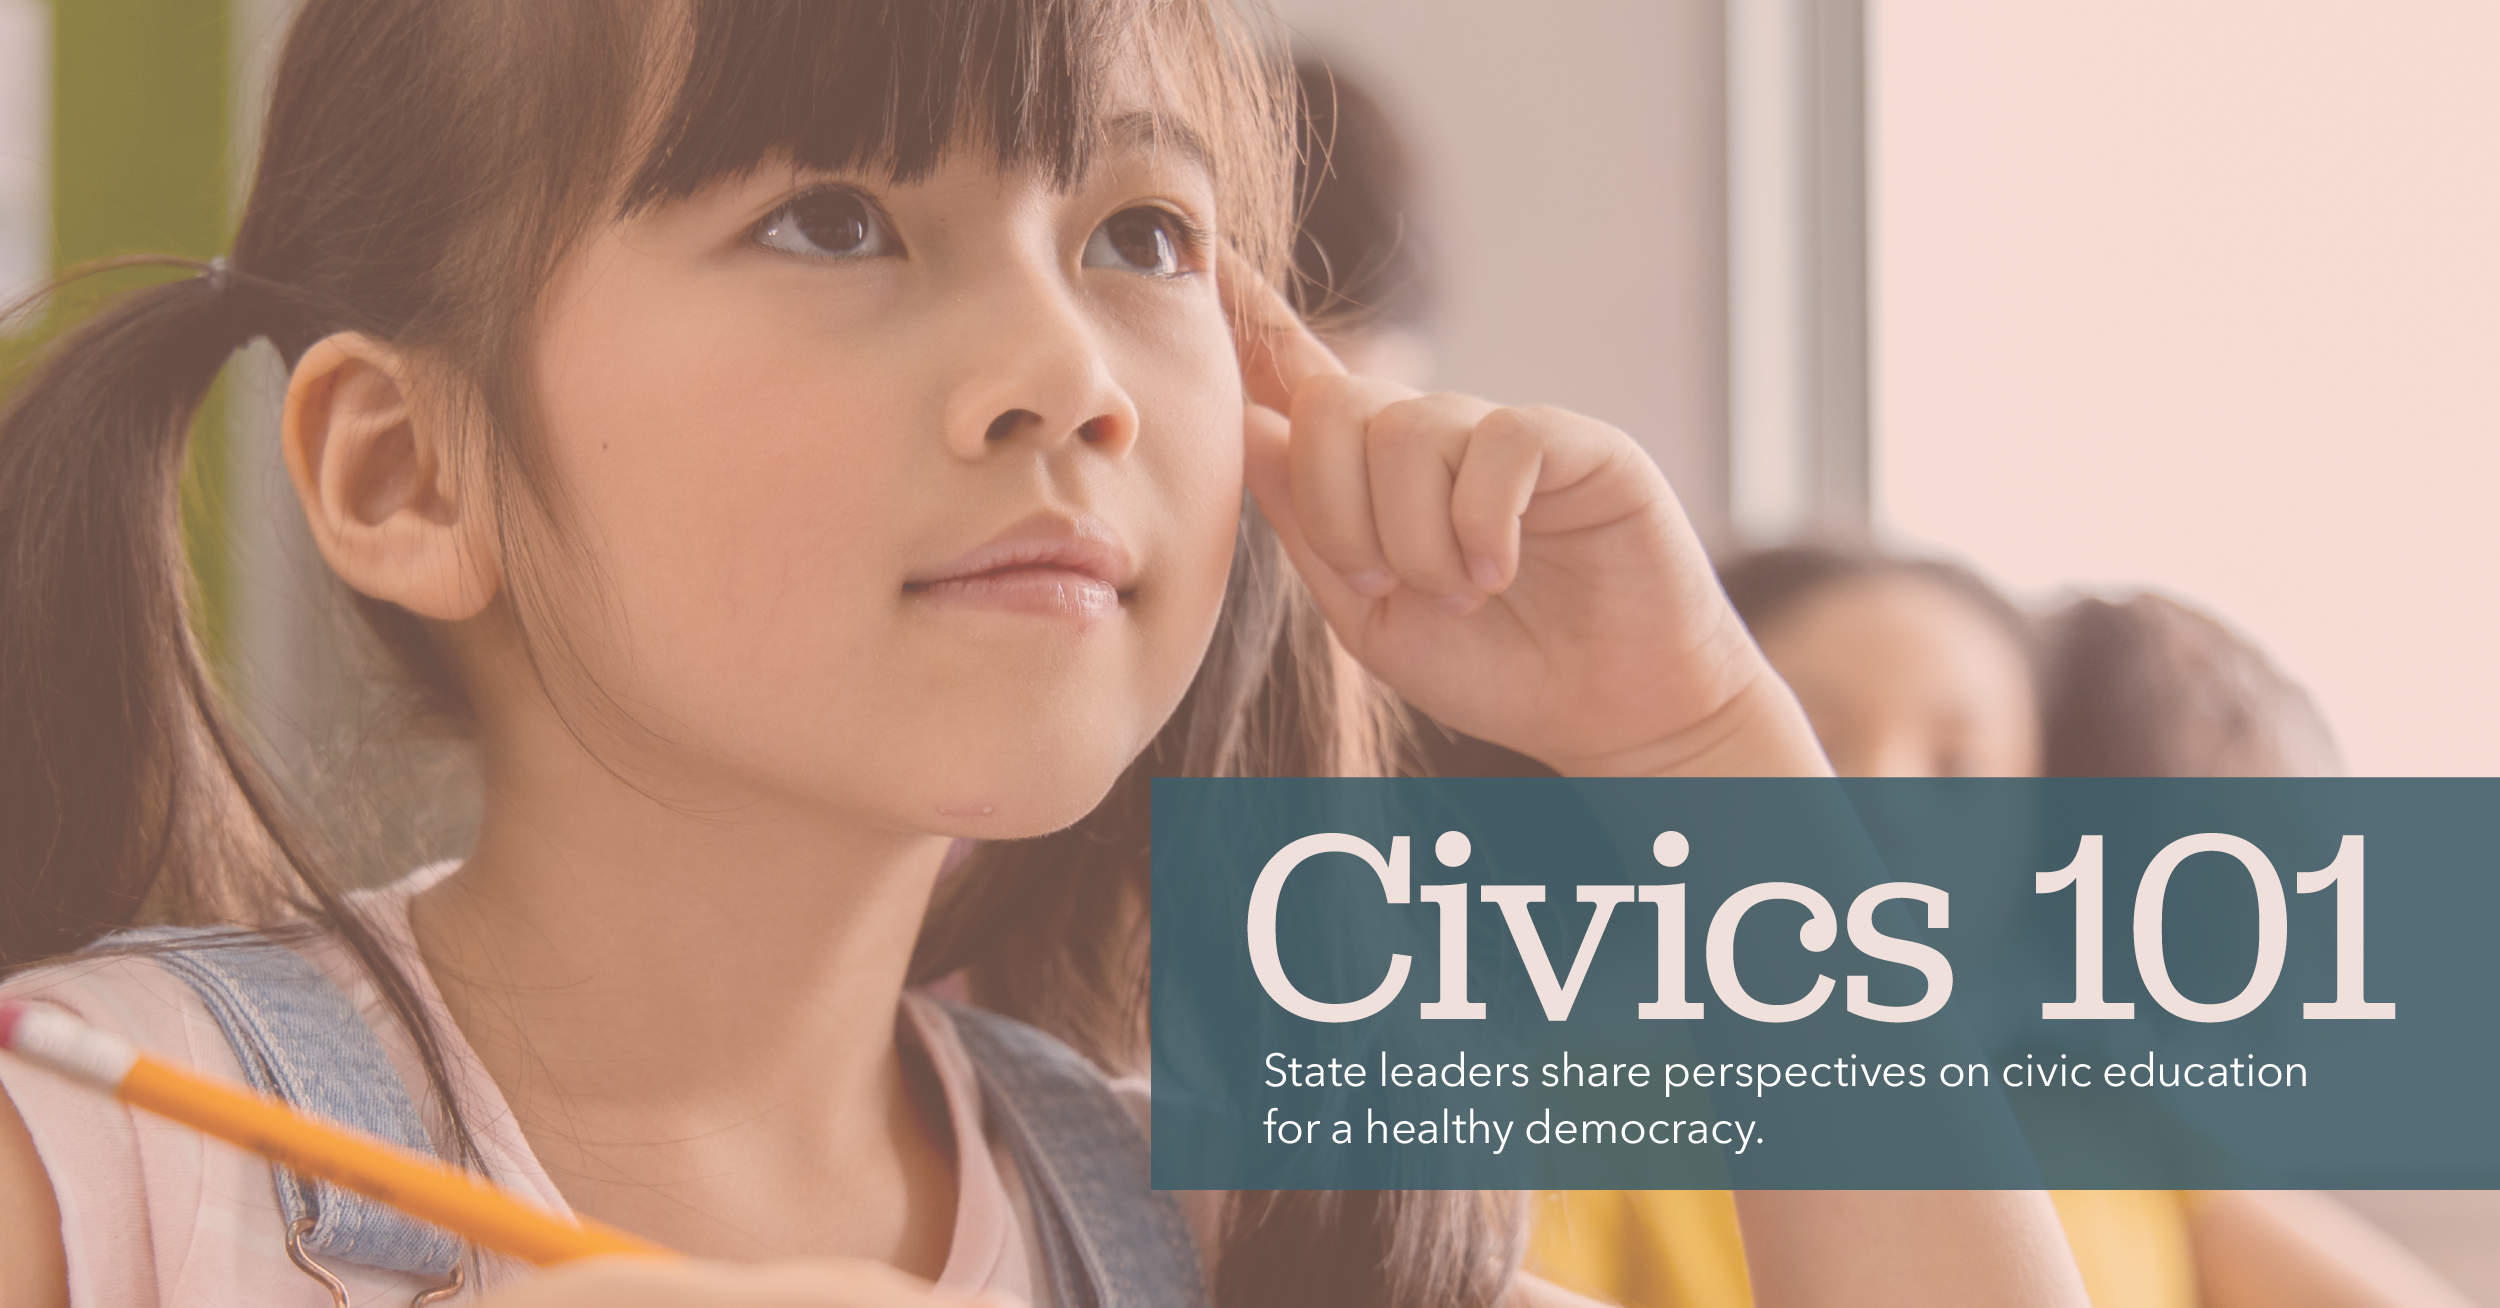 Image of child with text overlayed that reads "Civics 101 State leaders share perspectives on civic education for a healthy democracy"